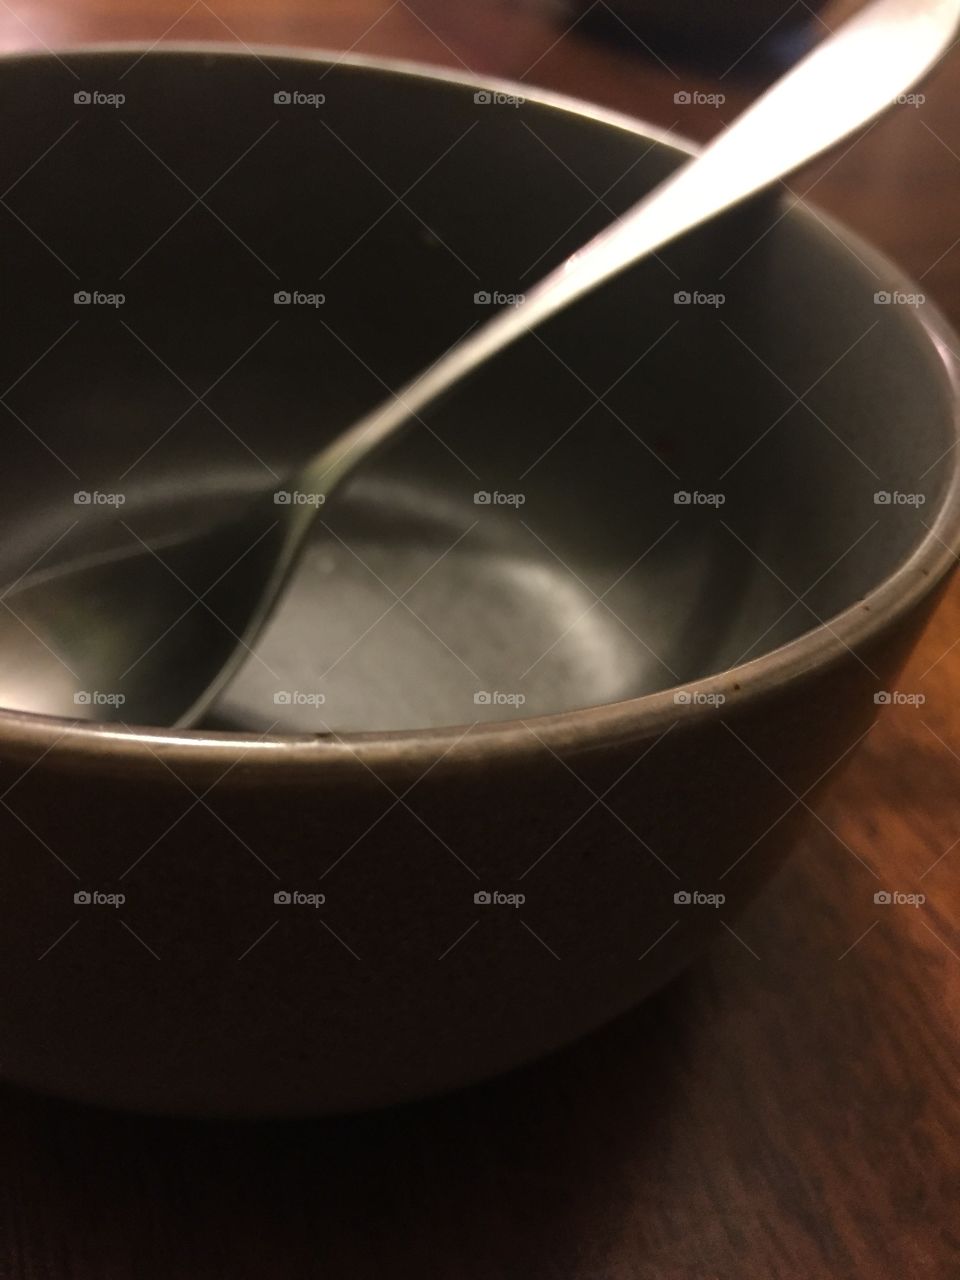 A Spoon in a Bowl on the Kitchen Table